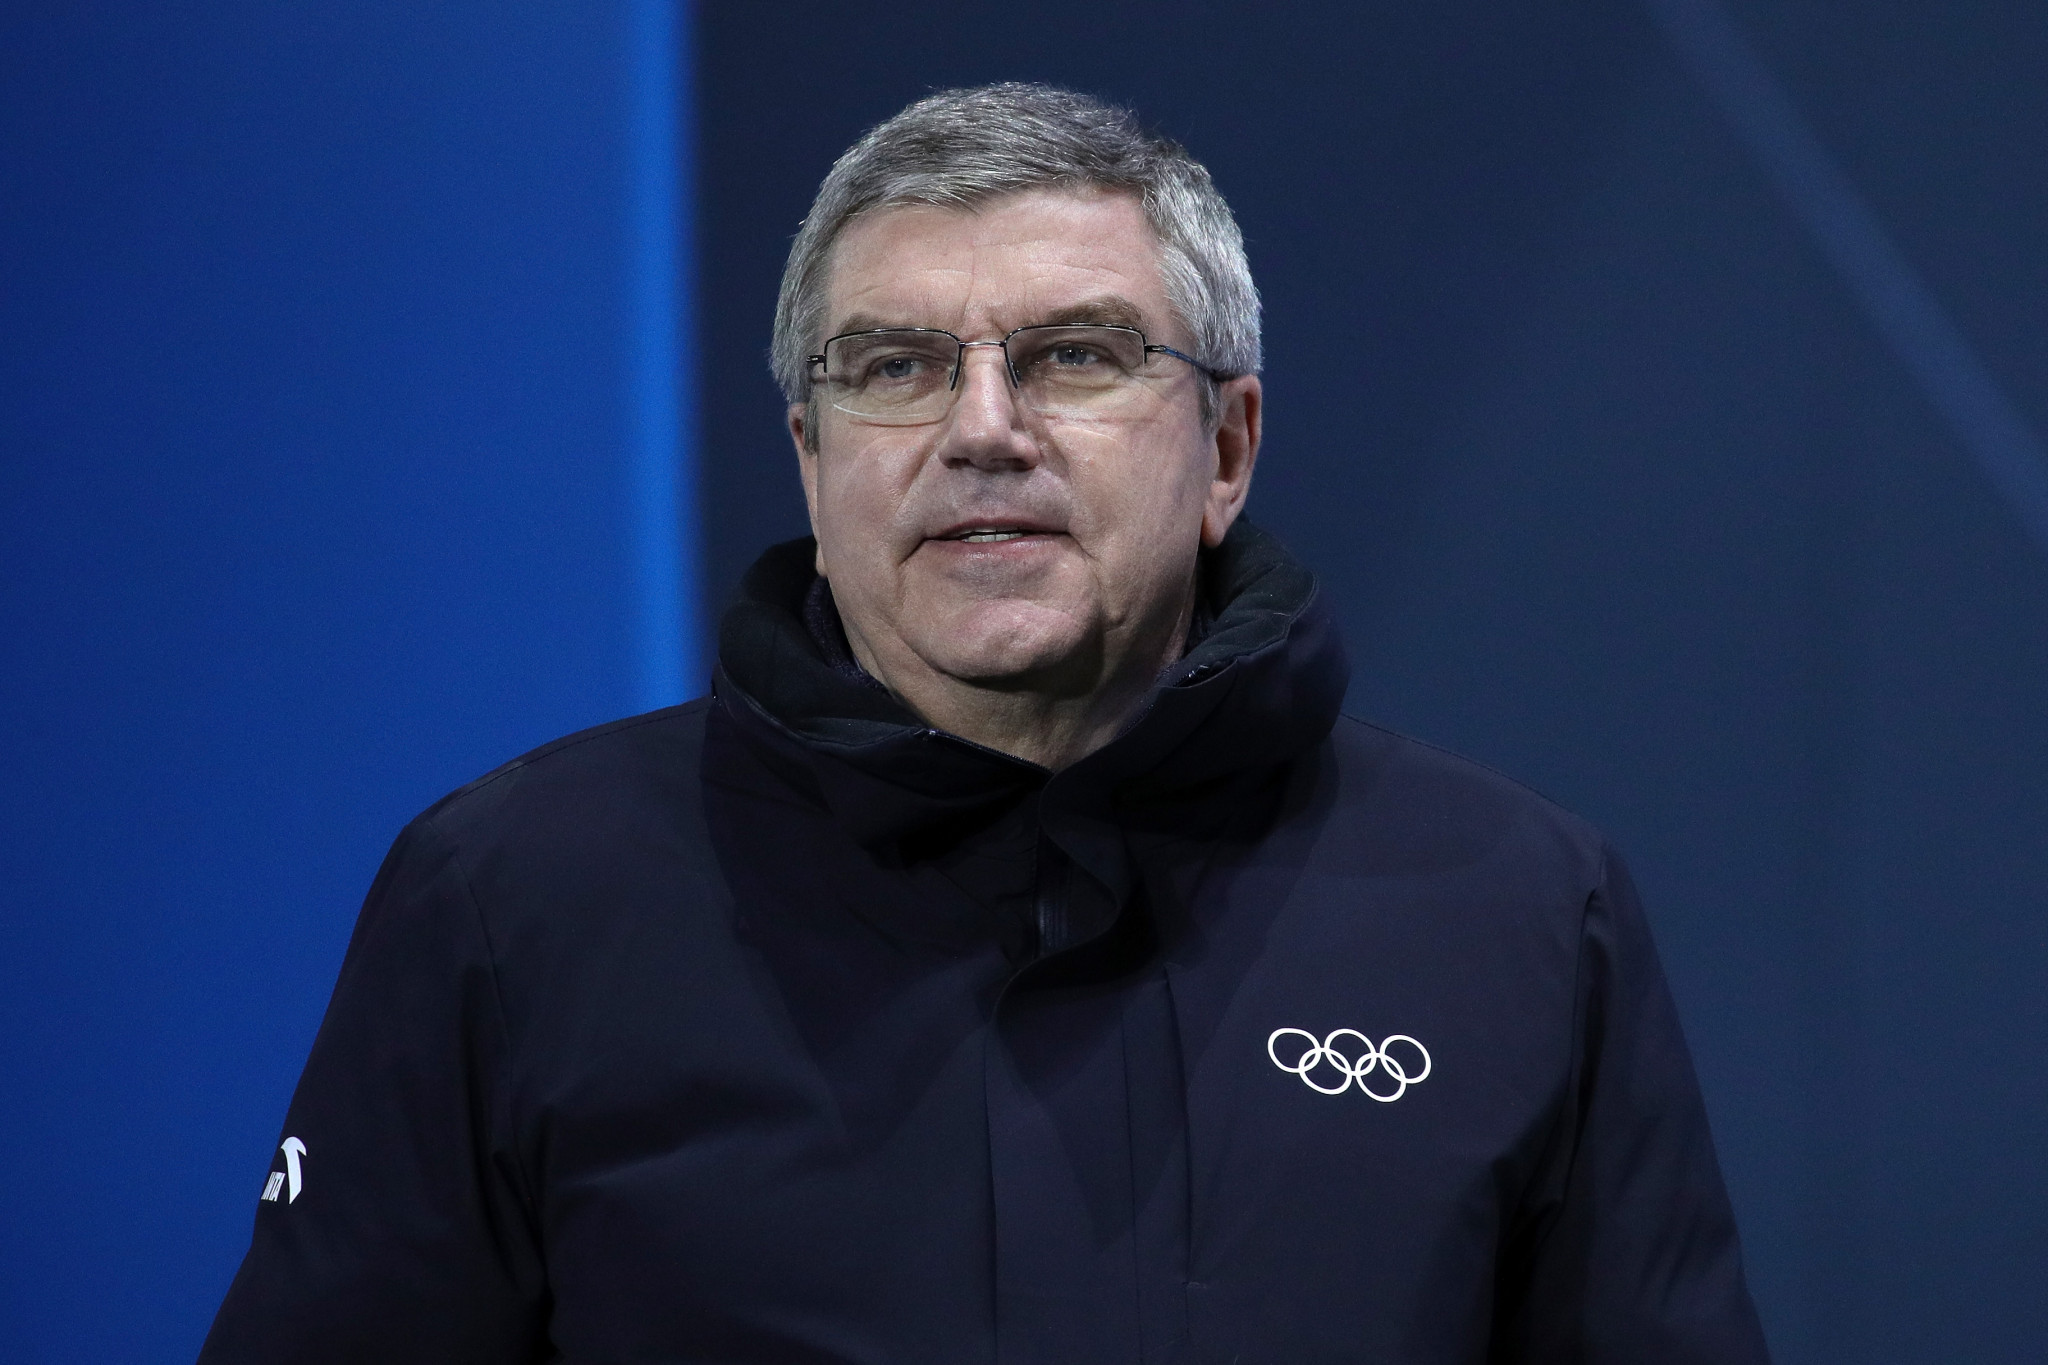 IOC President Thomas Bach chaired the Executive Board meeting today ©Getty Images